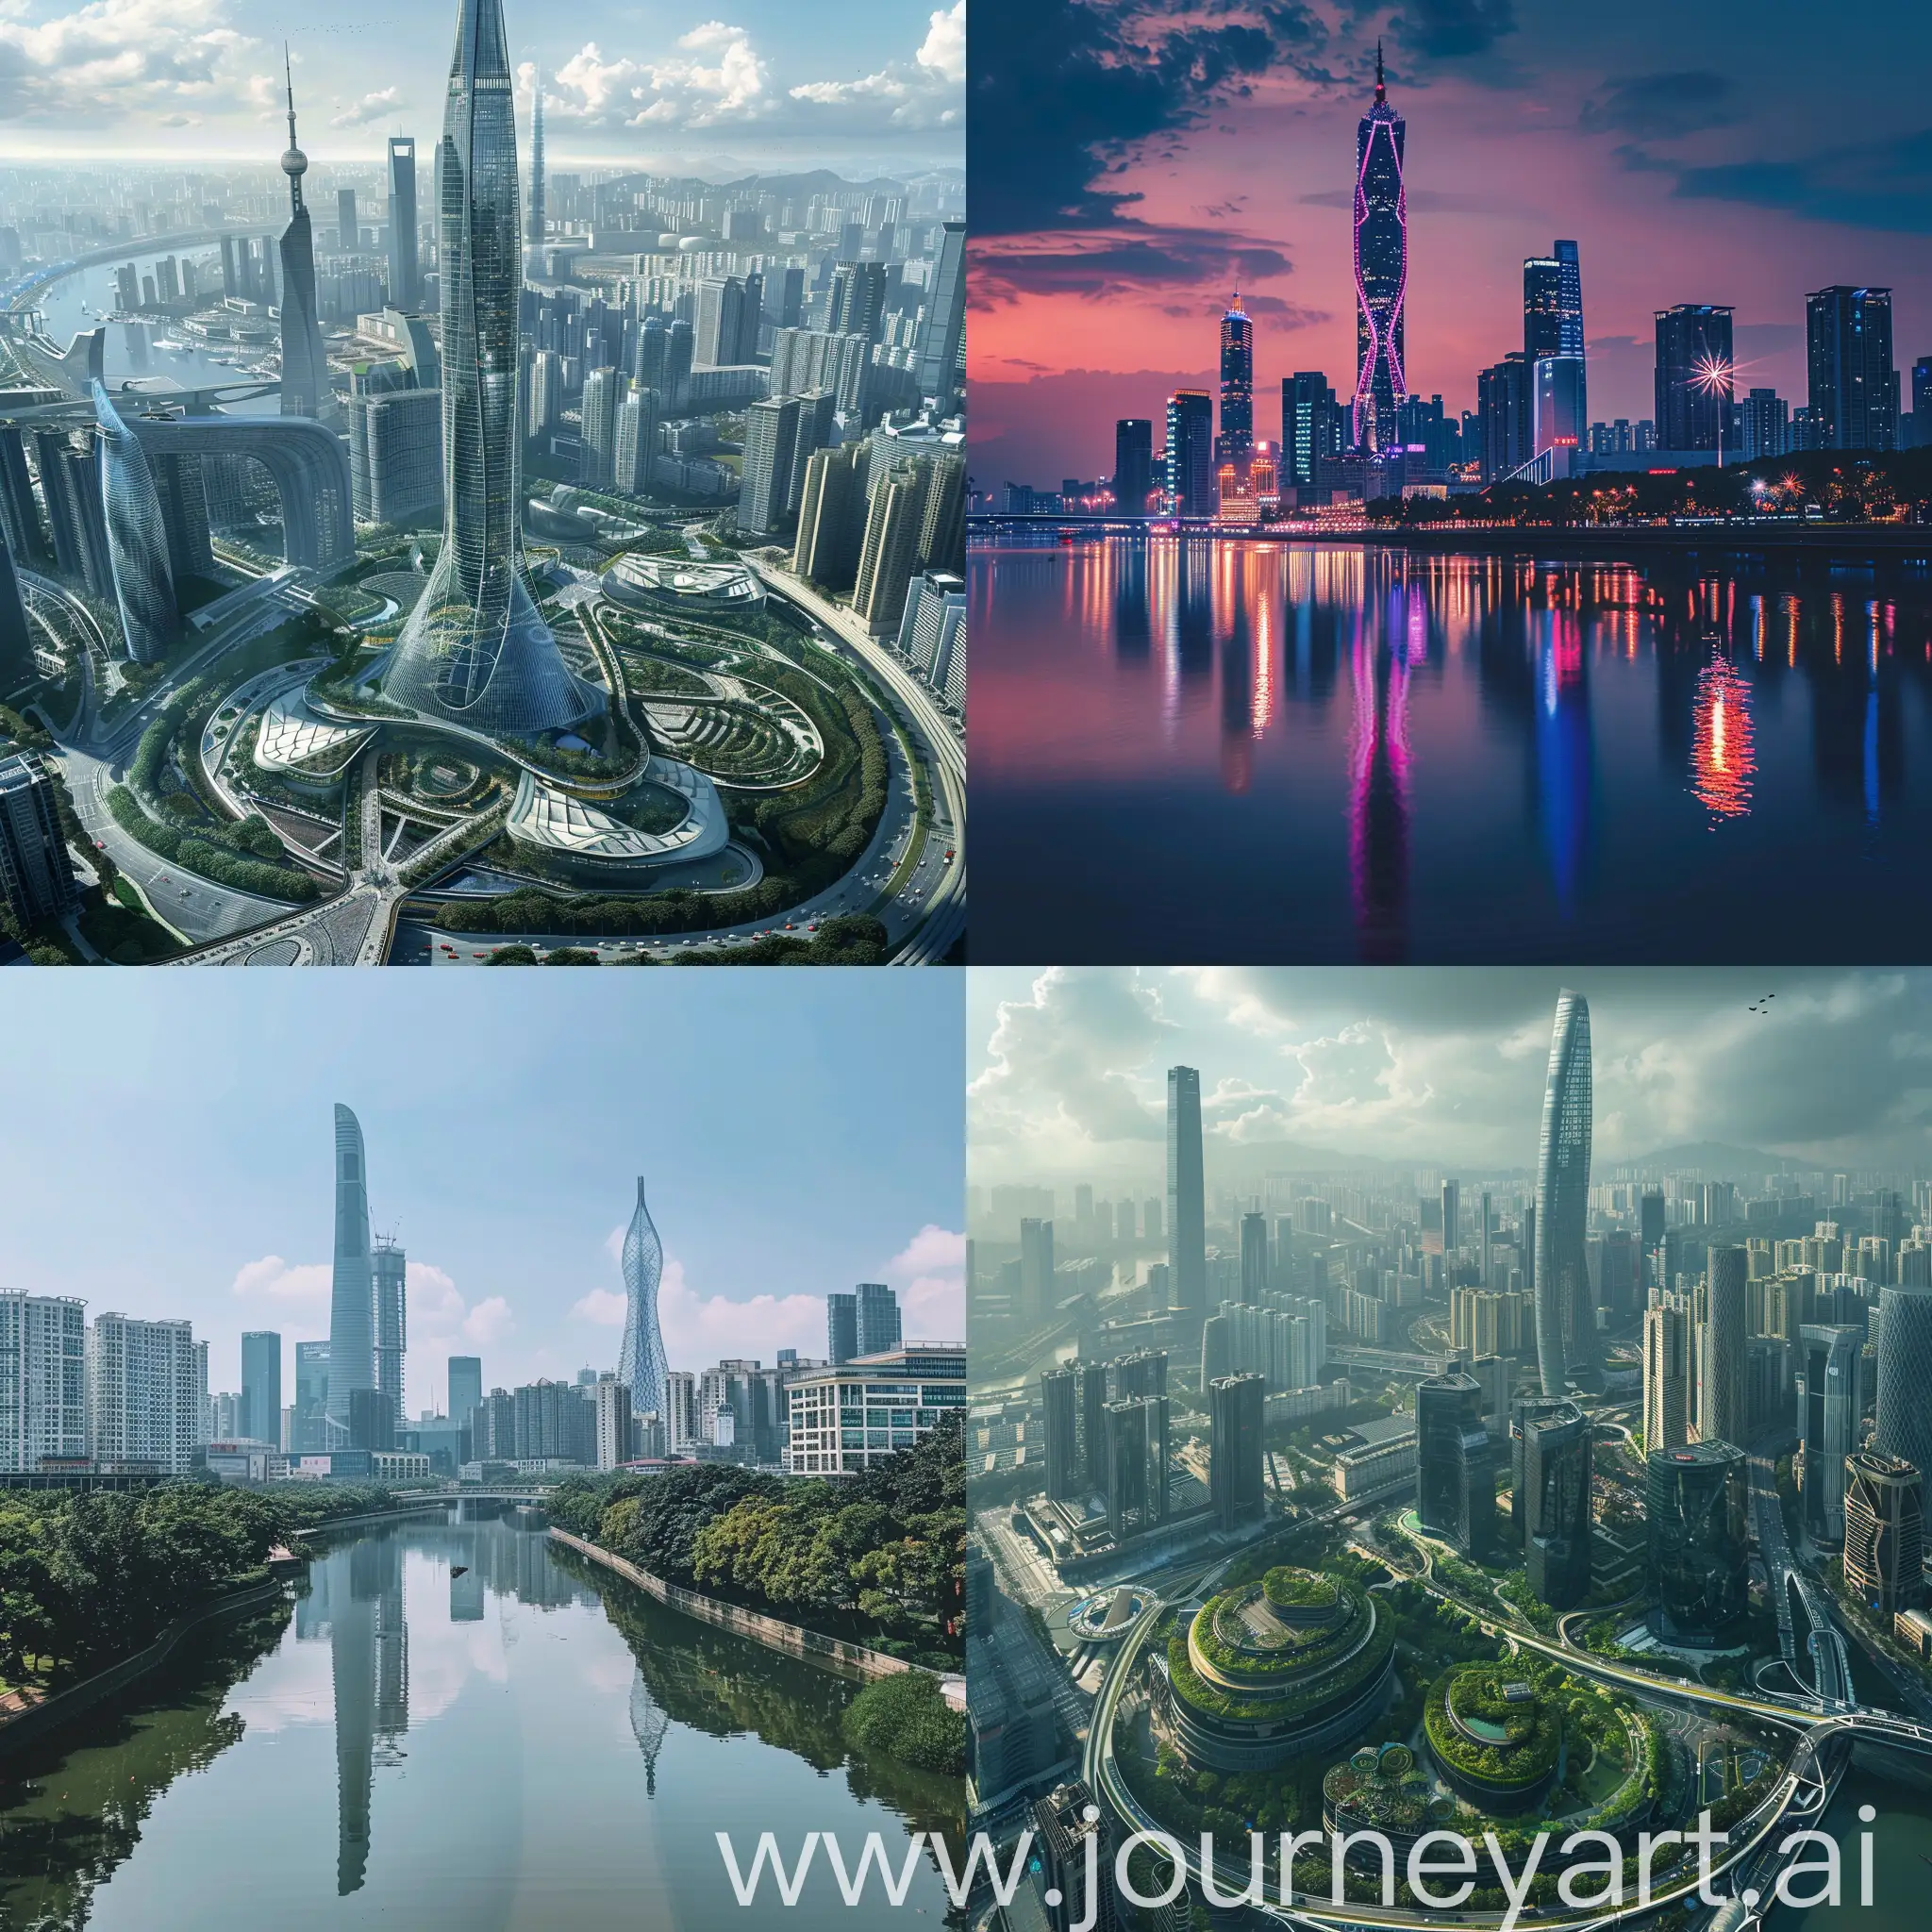 Futuristic-Vision-of-Guangzhou-Imagining-the-Cityscape-50-Years-Ahead